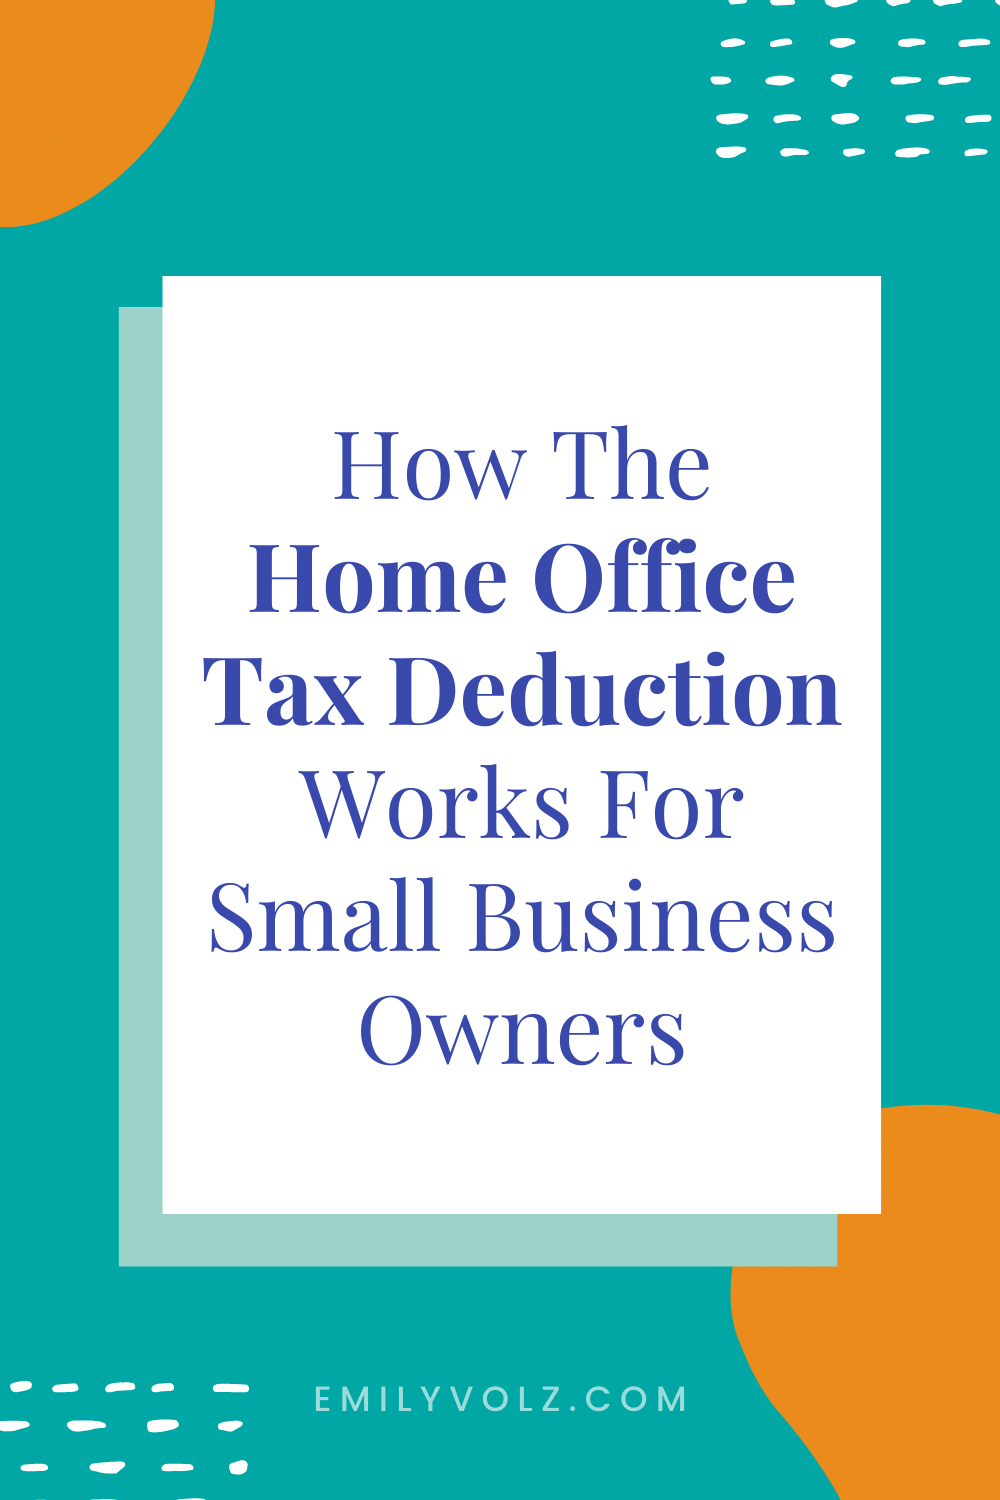 How Home Office Tax Deduction Works For Small Business Owners | Emily Volz Bookkeeper & CFO